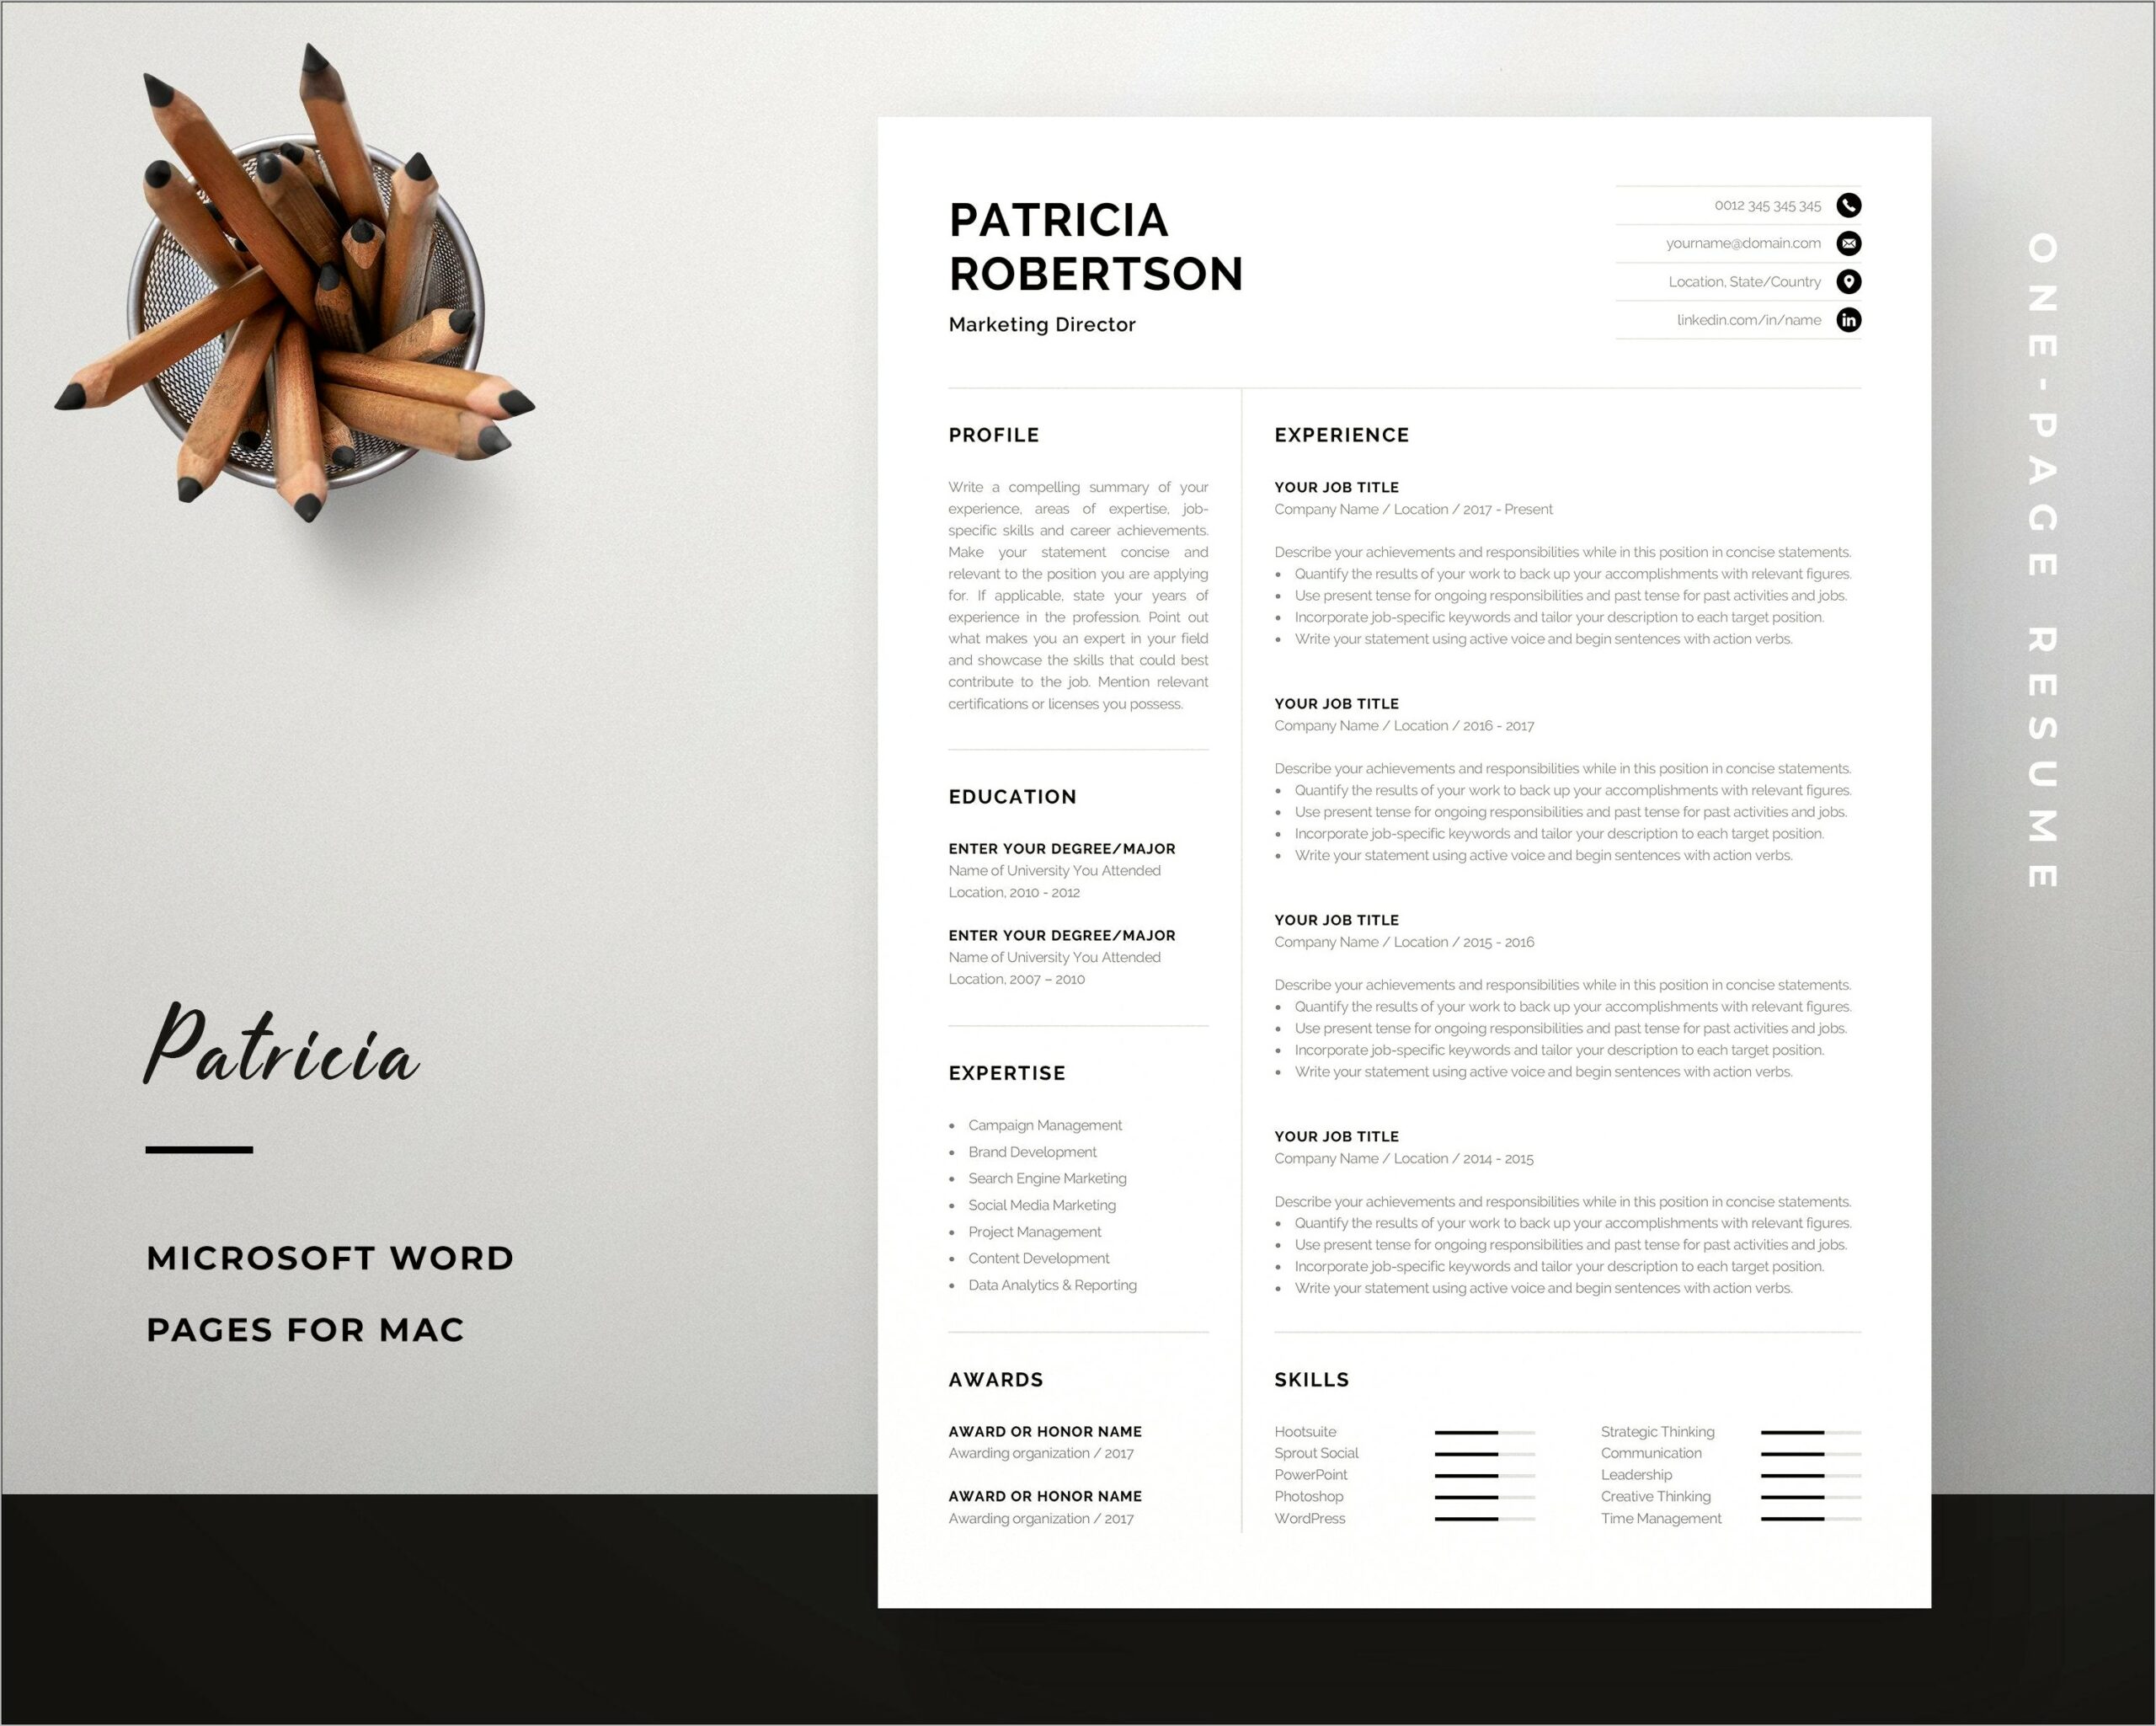 Micrsoft Word 2 Page Resume Templates